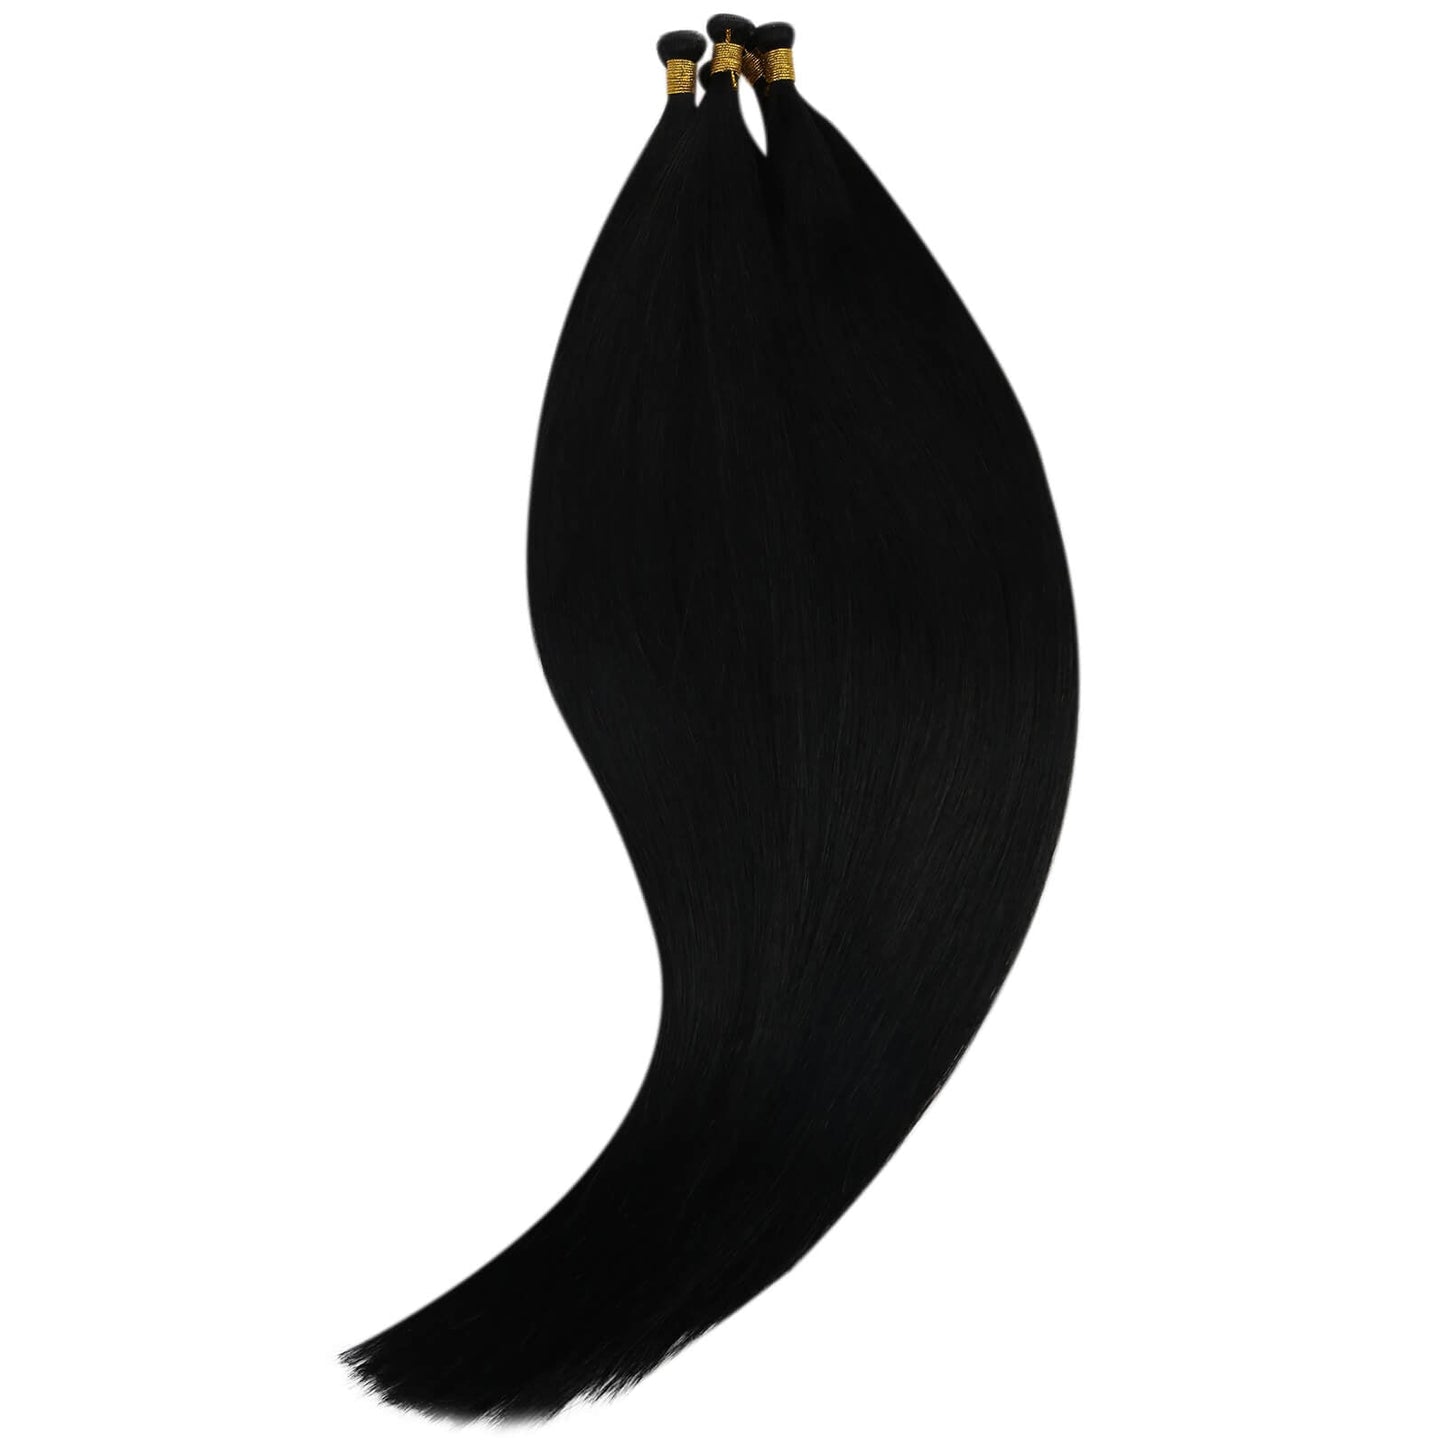 Thick Genius Weft Extensions Human Hair Weft Jet Black salon professional hair extensions